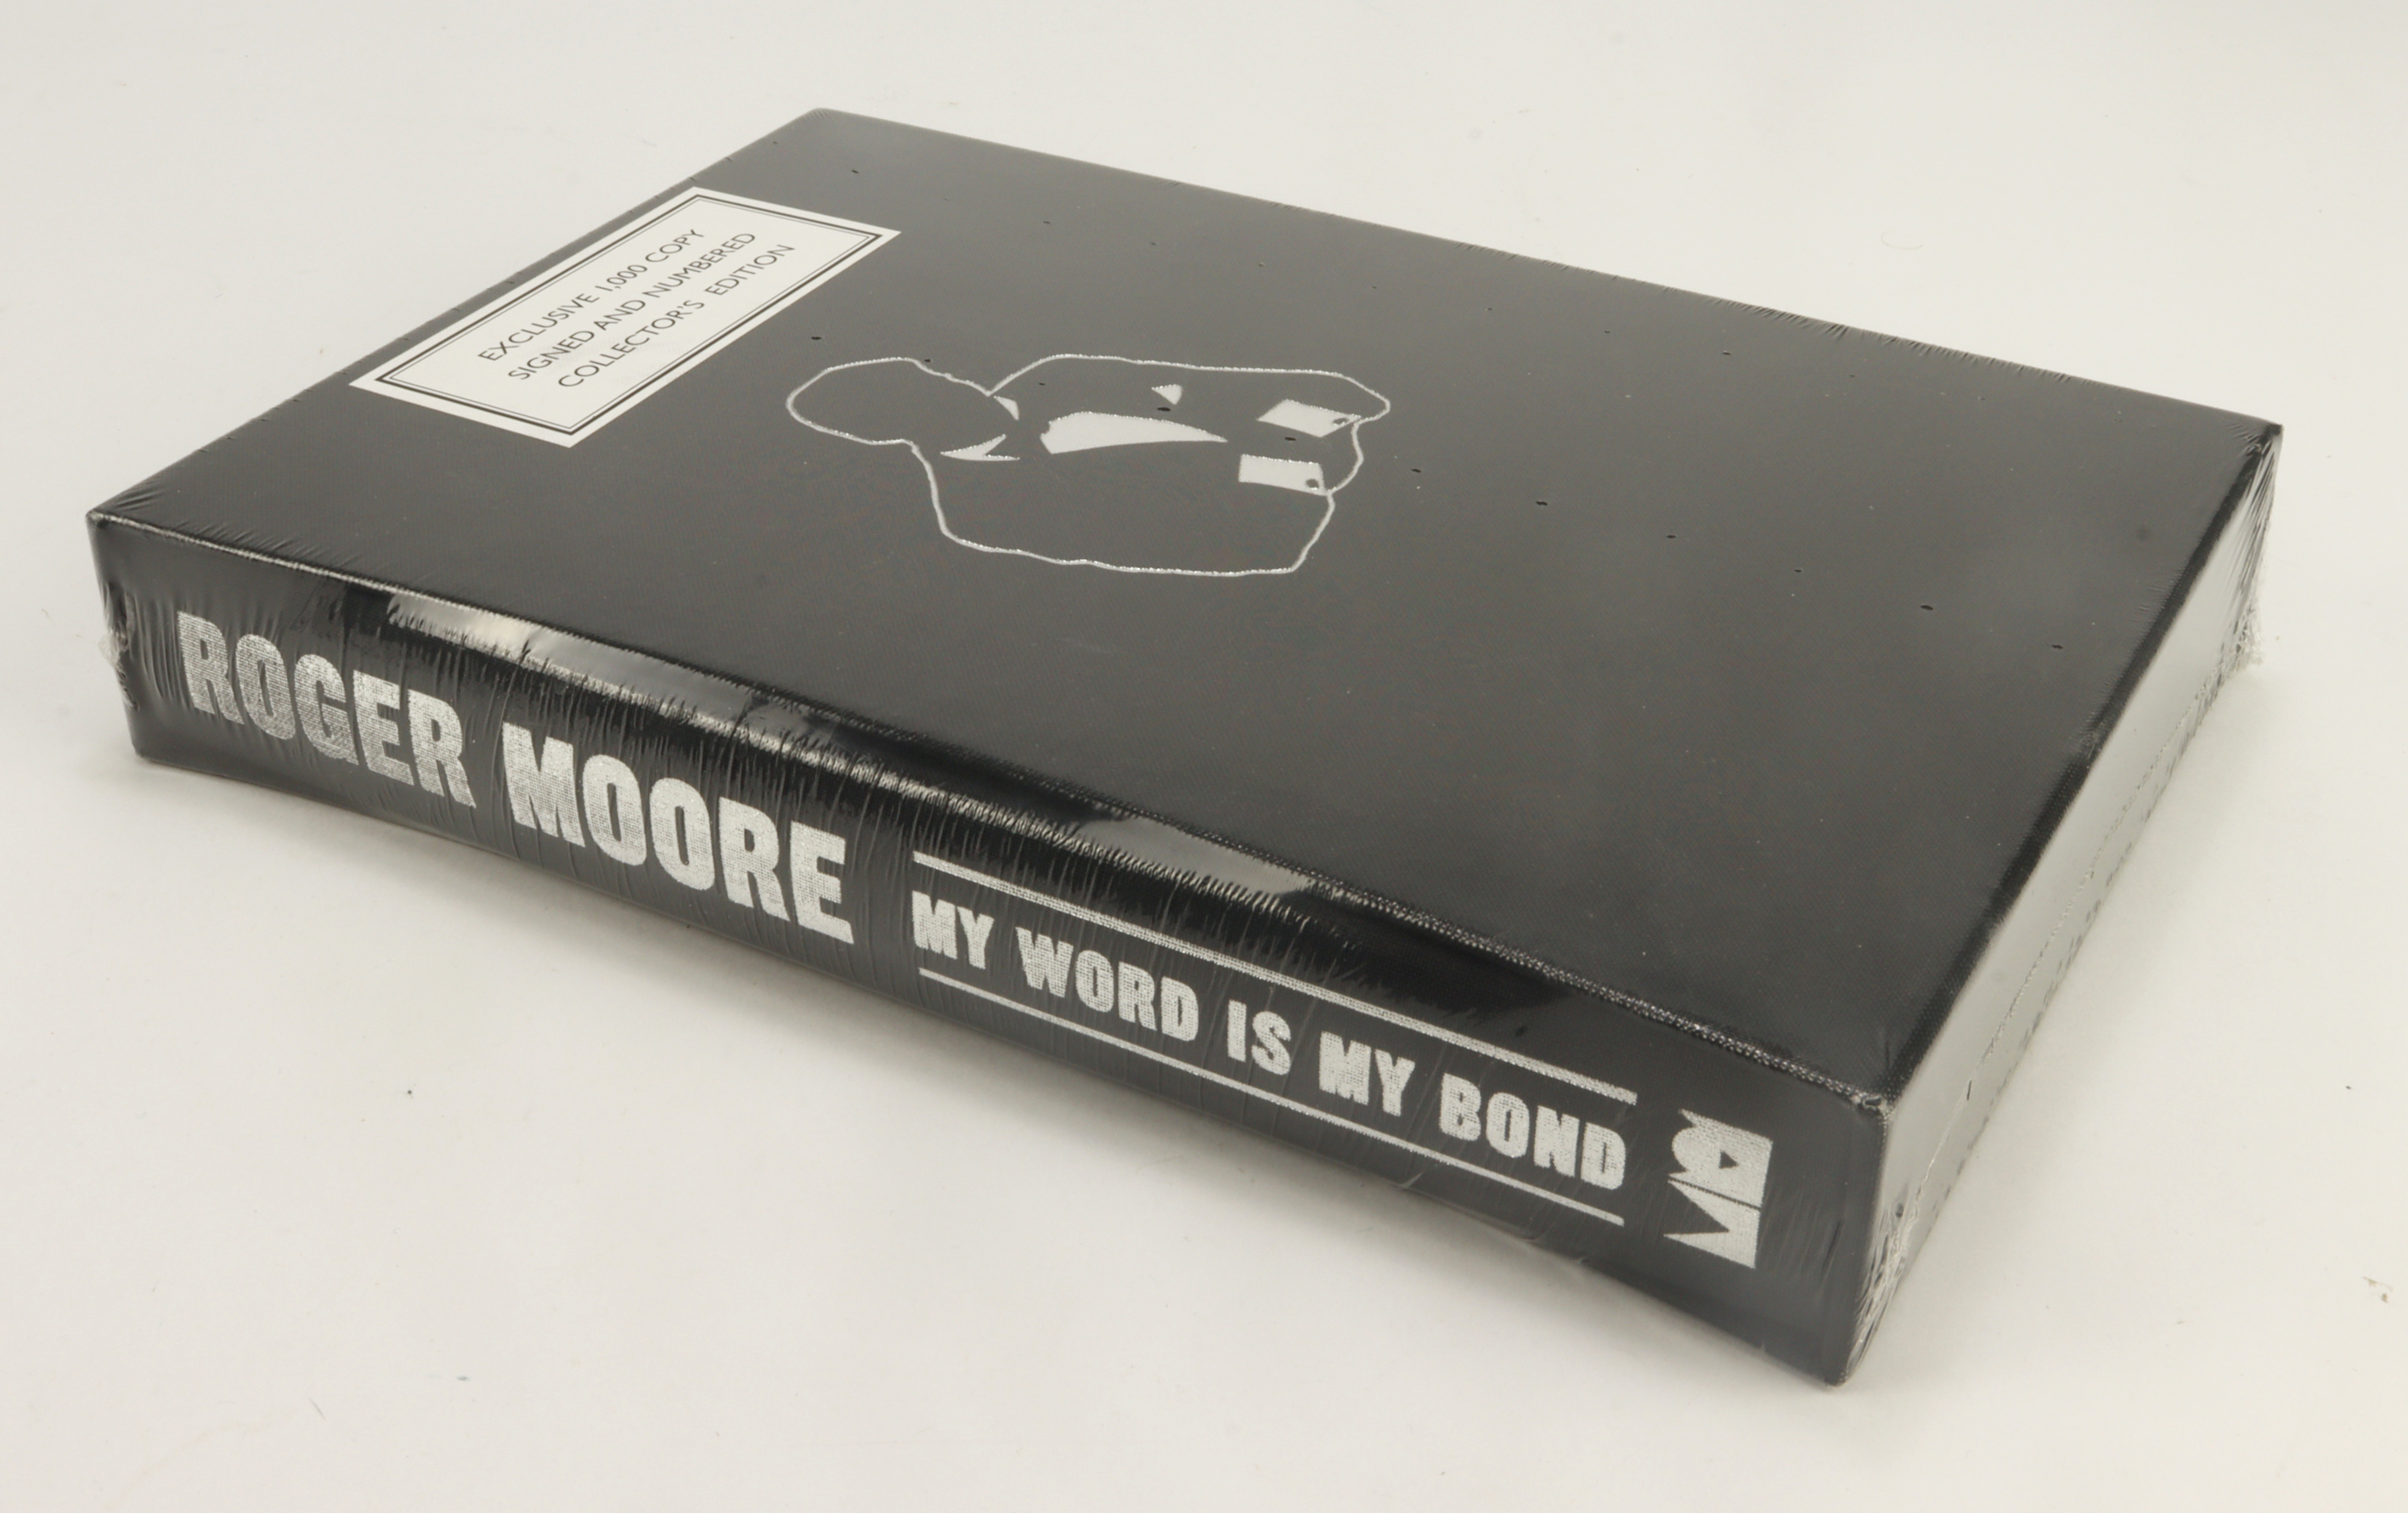 Moore (Roger). My Word is my Bond, 2008, limited signed and numbered collectors edition (of 1000